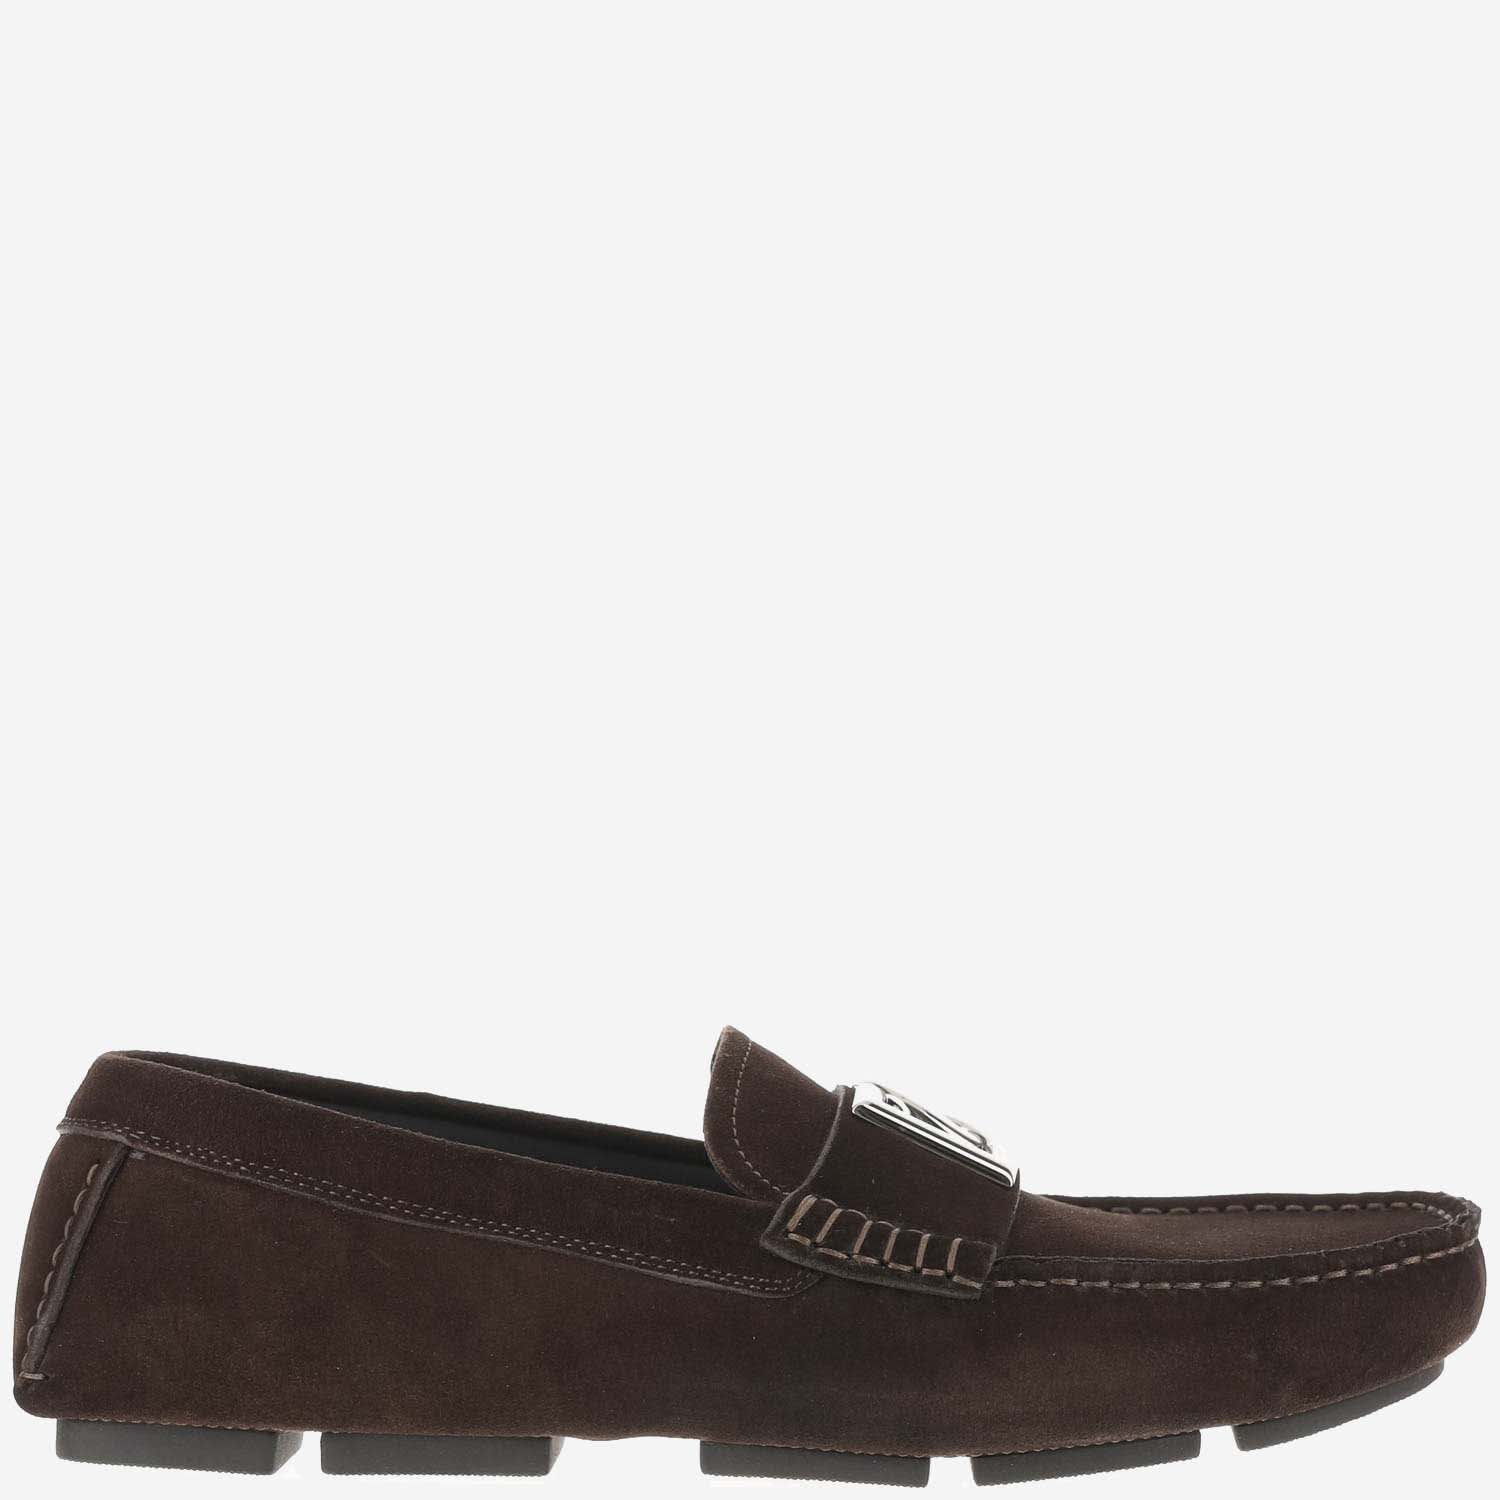 DOLCE & GABBANA SUEDE LOAFERS WITH LOGO